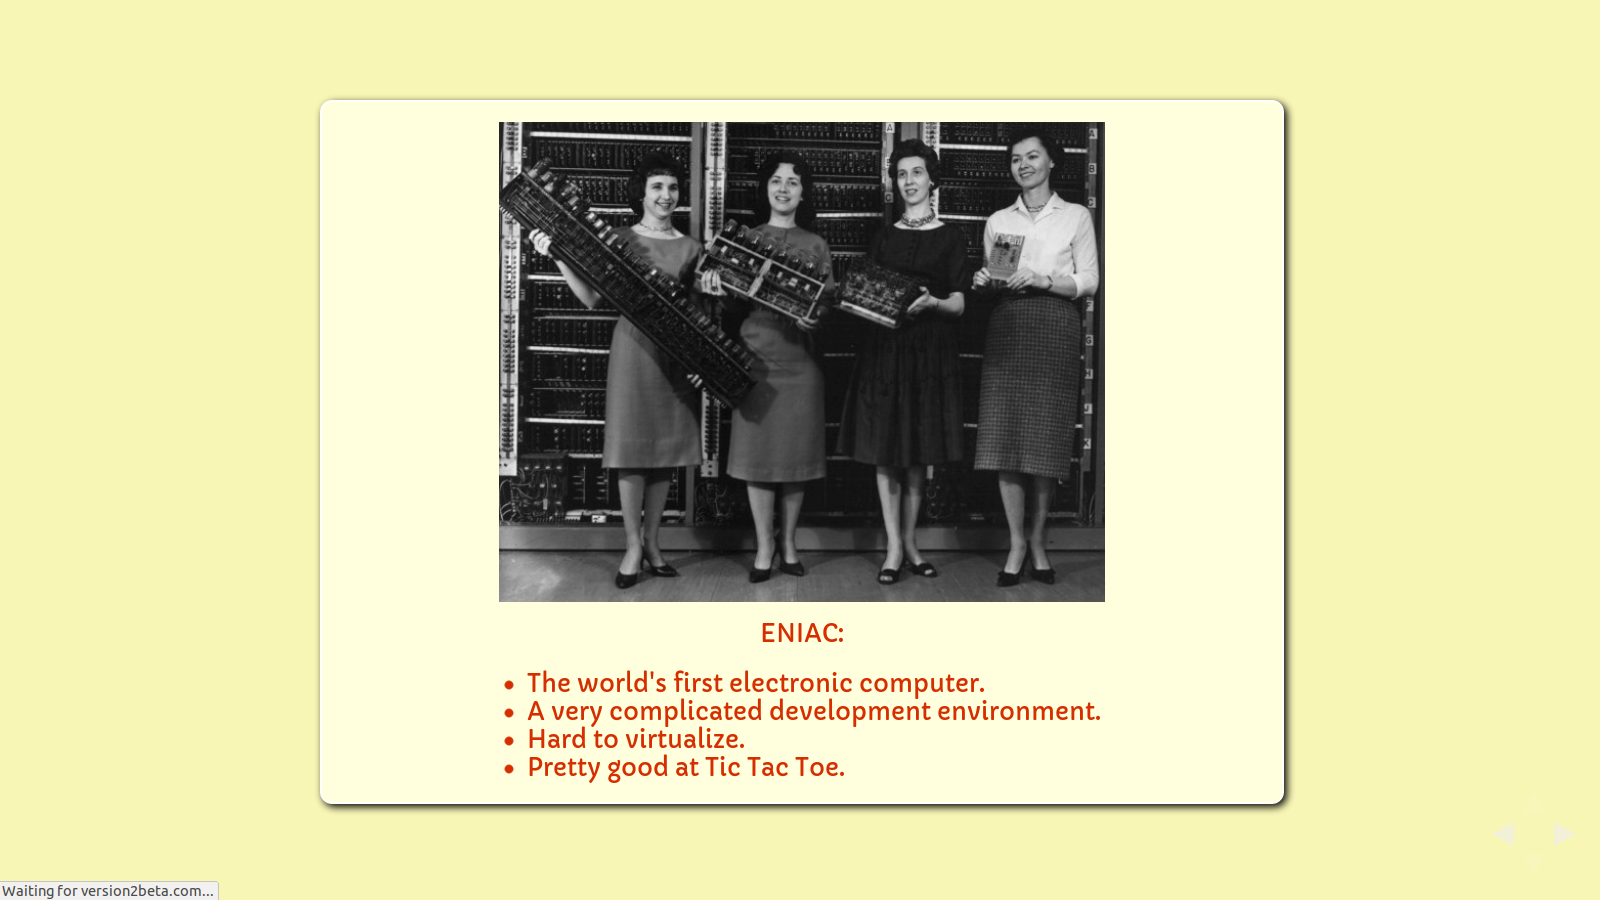 Slide: Eniac. The world's first general purpose electronic computer. A very complicated development environment. Hard to virtualize. Pretty good at Tic Tac Toe.